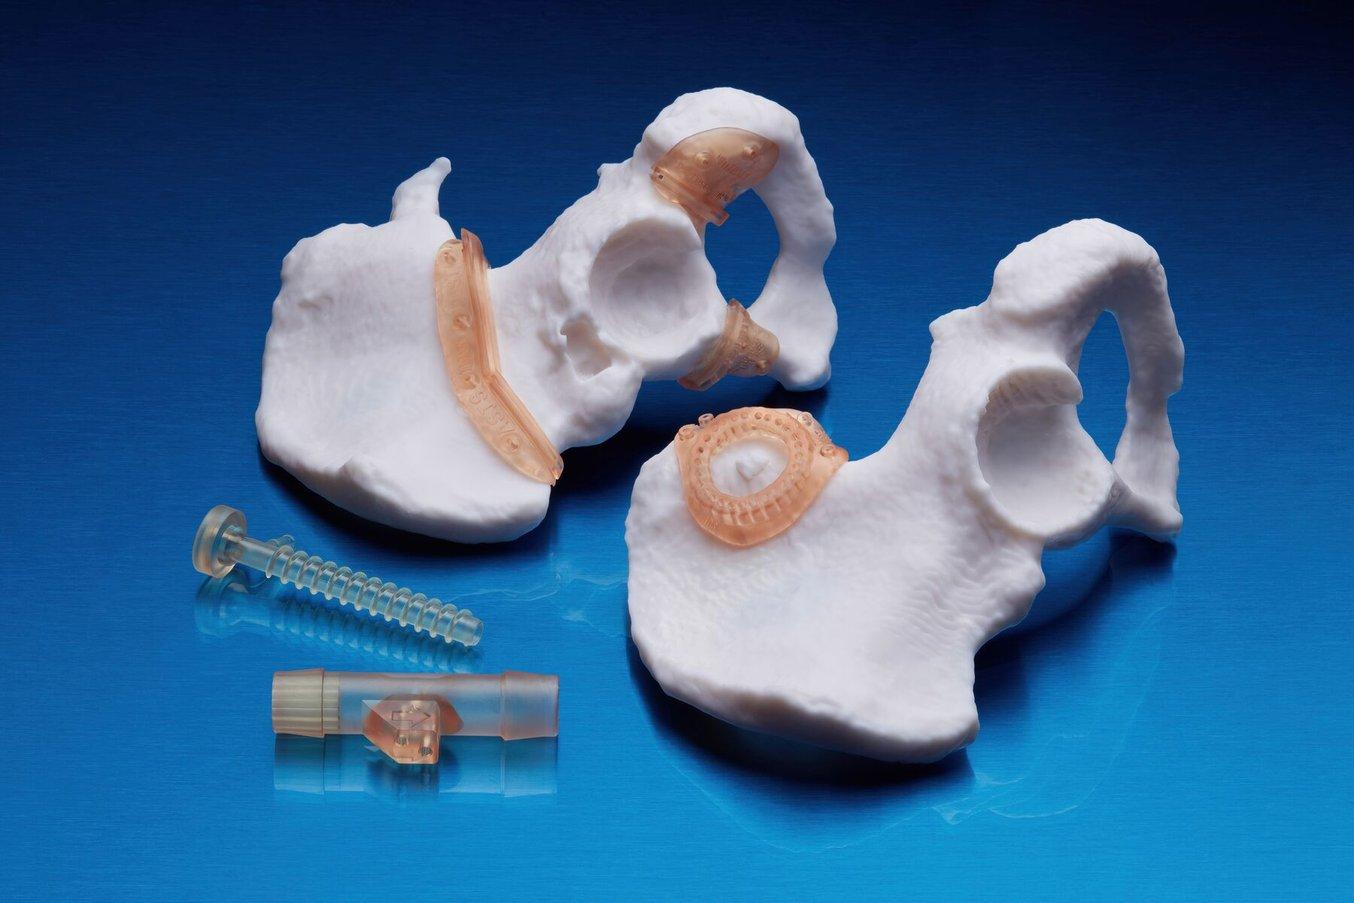 biomedical devices and anatomical models, 3D printed